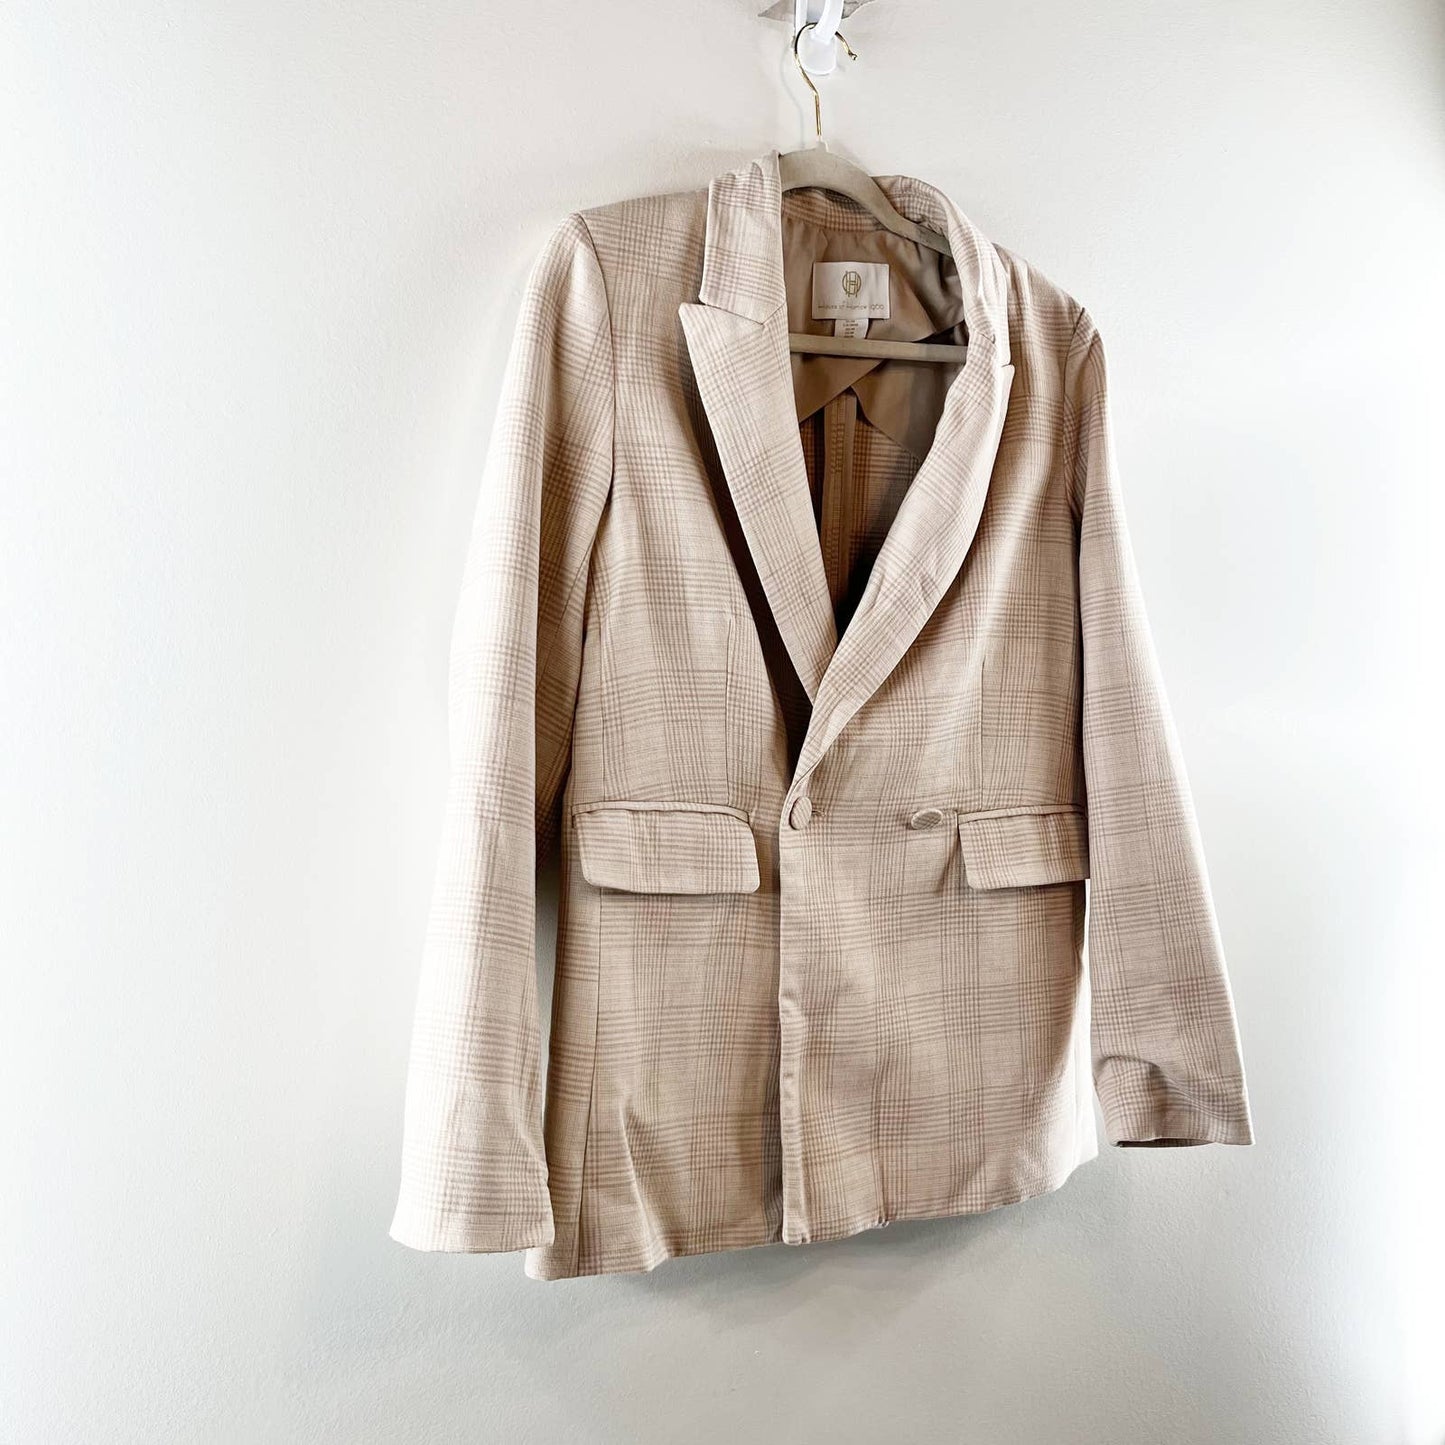 House of Harlow 1960 Plaid Notched Lapel Double Breasted Blazer Jacket Beige M